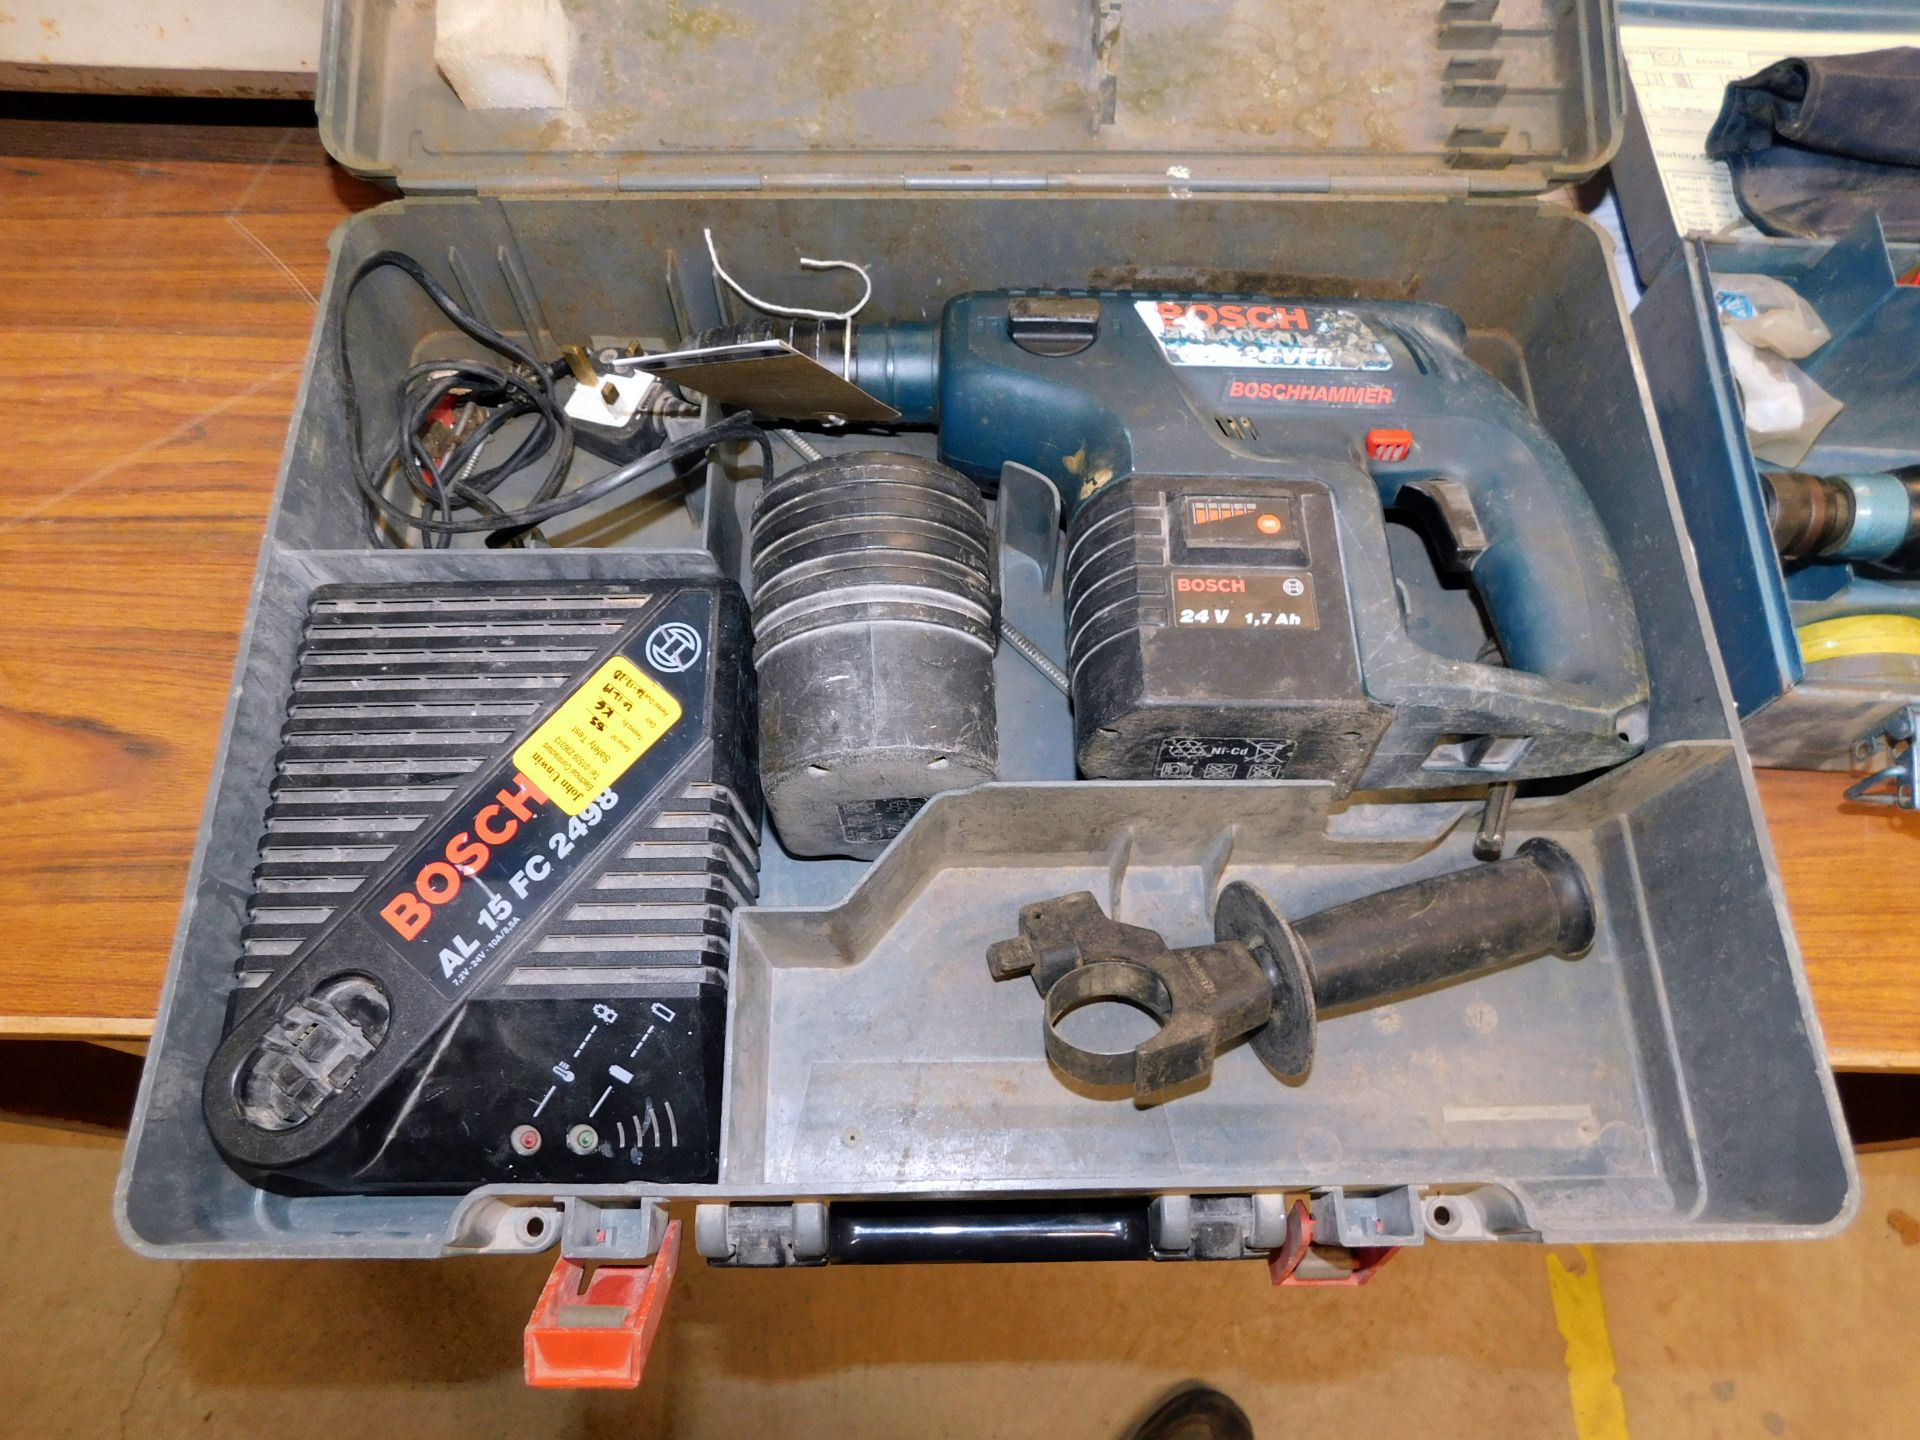 Bosch hammer gbh24vfr cordless drill with 2 batteries and charger (Location: Brentwood. Please Refer